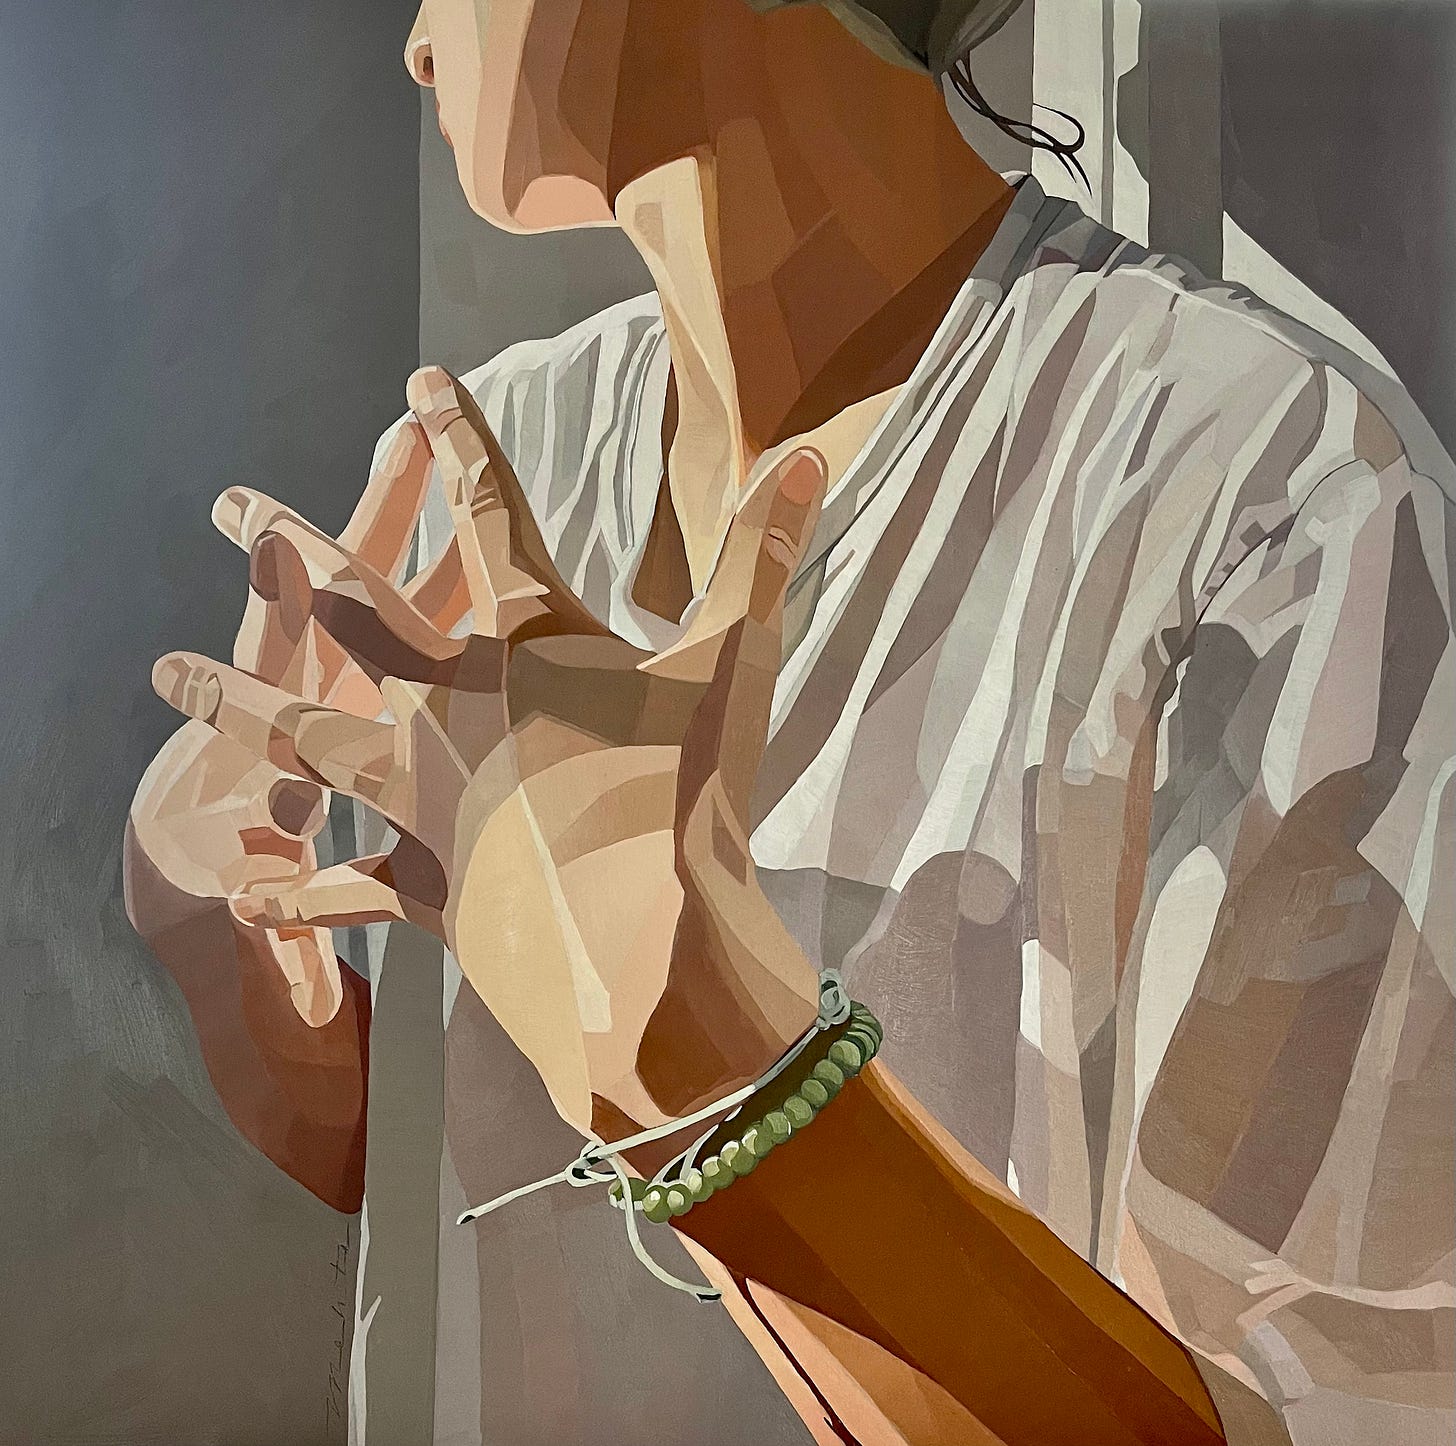 A painting of a person's hand

Description automatically generated